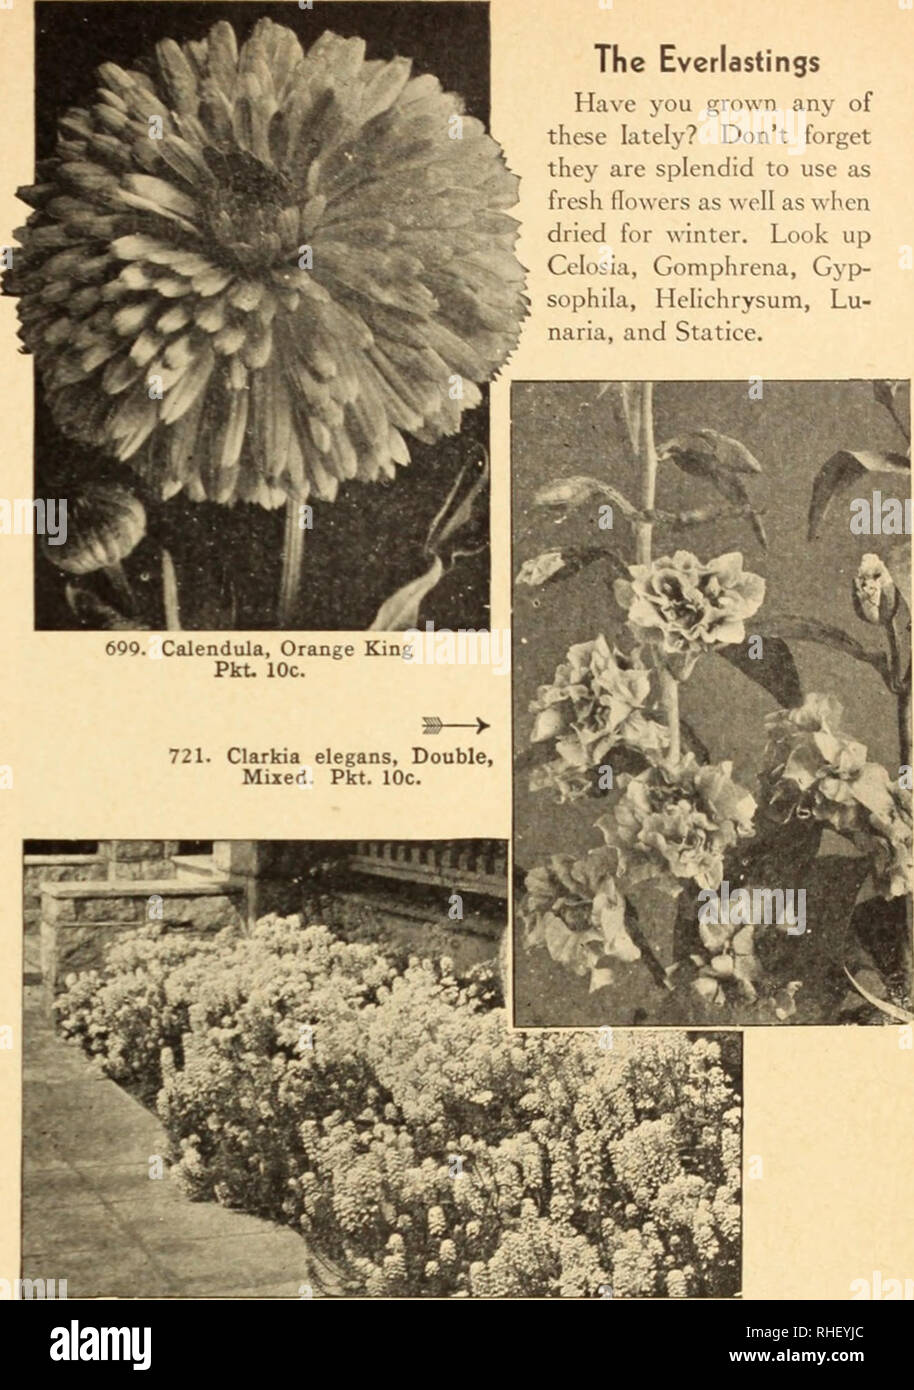 . Bolgiano's capitol city seeds for 1947. Nurseries (Horticulture) Catalogs; Bulbs (Plants) Catalogs; Vegetables Catalogs; Garden tools Catalogs; Seeds Catalogs. Canterbury Bells A., B. 70S. Campanula medium. Single, Mixed. B. Beautiful bcii-like riowers of blue, pink, and while in eaxly summer. A splendid border plant. 2 ft. Pkt. 10c.; 3-40z. 40c.; ijoz. :&gt;.-. 709. Annual Canterbury Bells, Mixed. A. Blooms in less than 5 months after sowing and by successive plant- ings one can have Canterbury Bells right up to frost. A mixture of various shades of blue, pink, rose, and while. 2 ft. Pkt. 1 Stock Photo